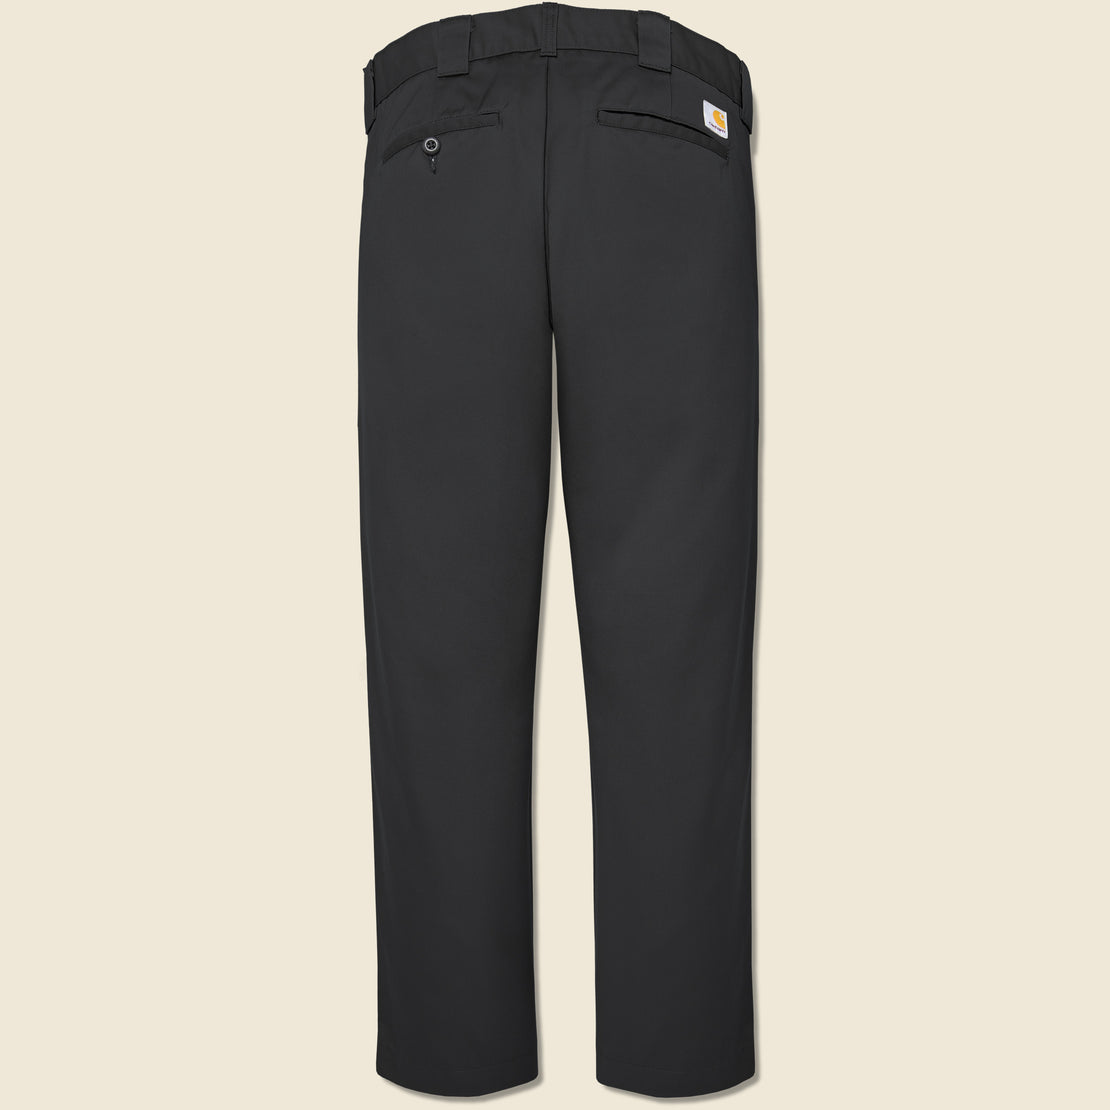 Carhartt WIP Master Pant Review - How the Carhartt Master Pant Fits